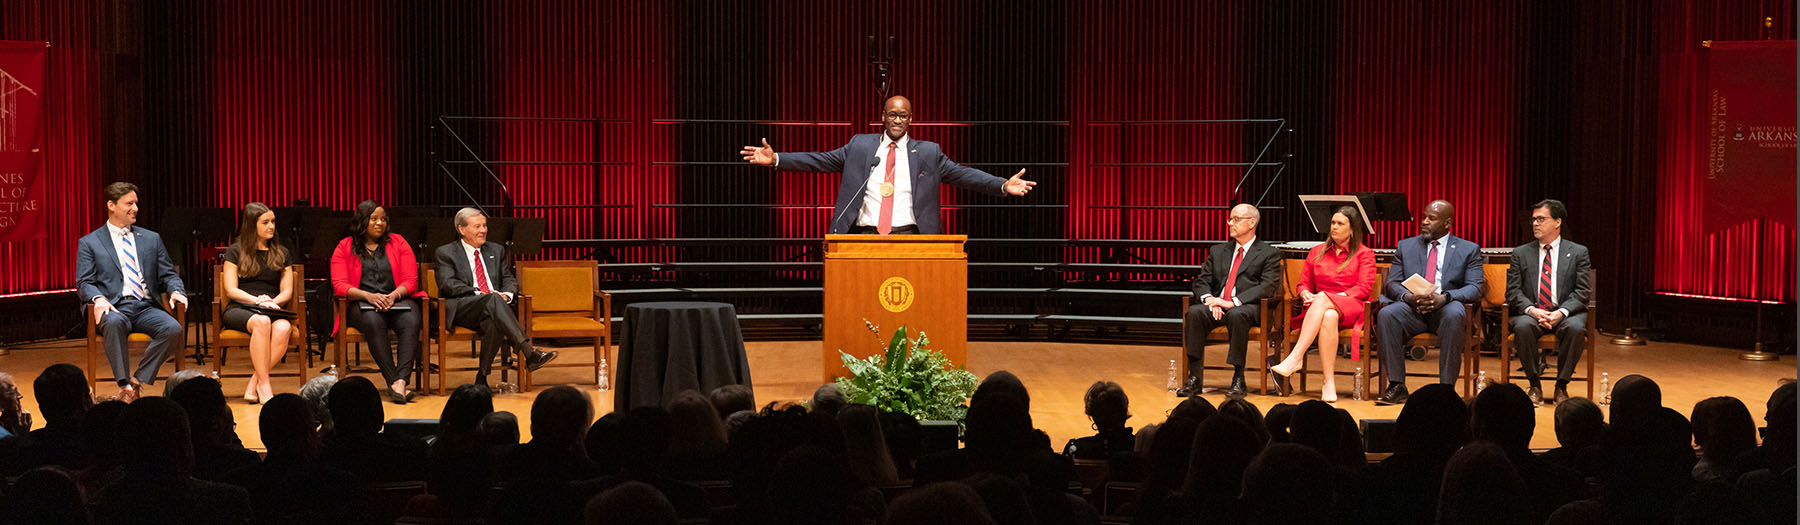 Charles Robinson makes closing remarks at his investiture ceremony with a wide arm gesture.